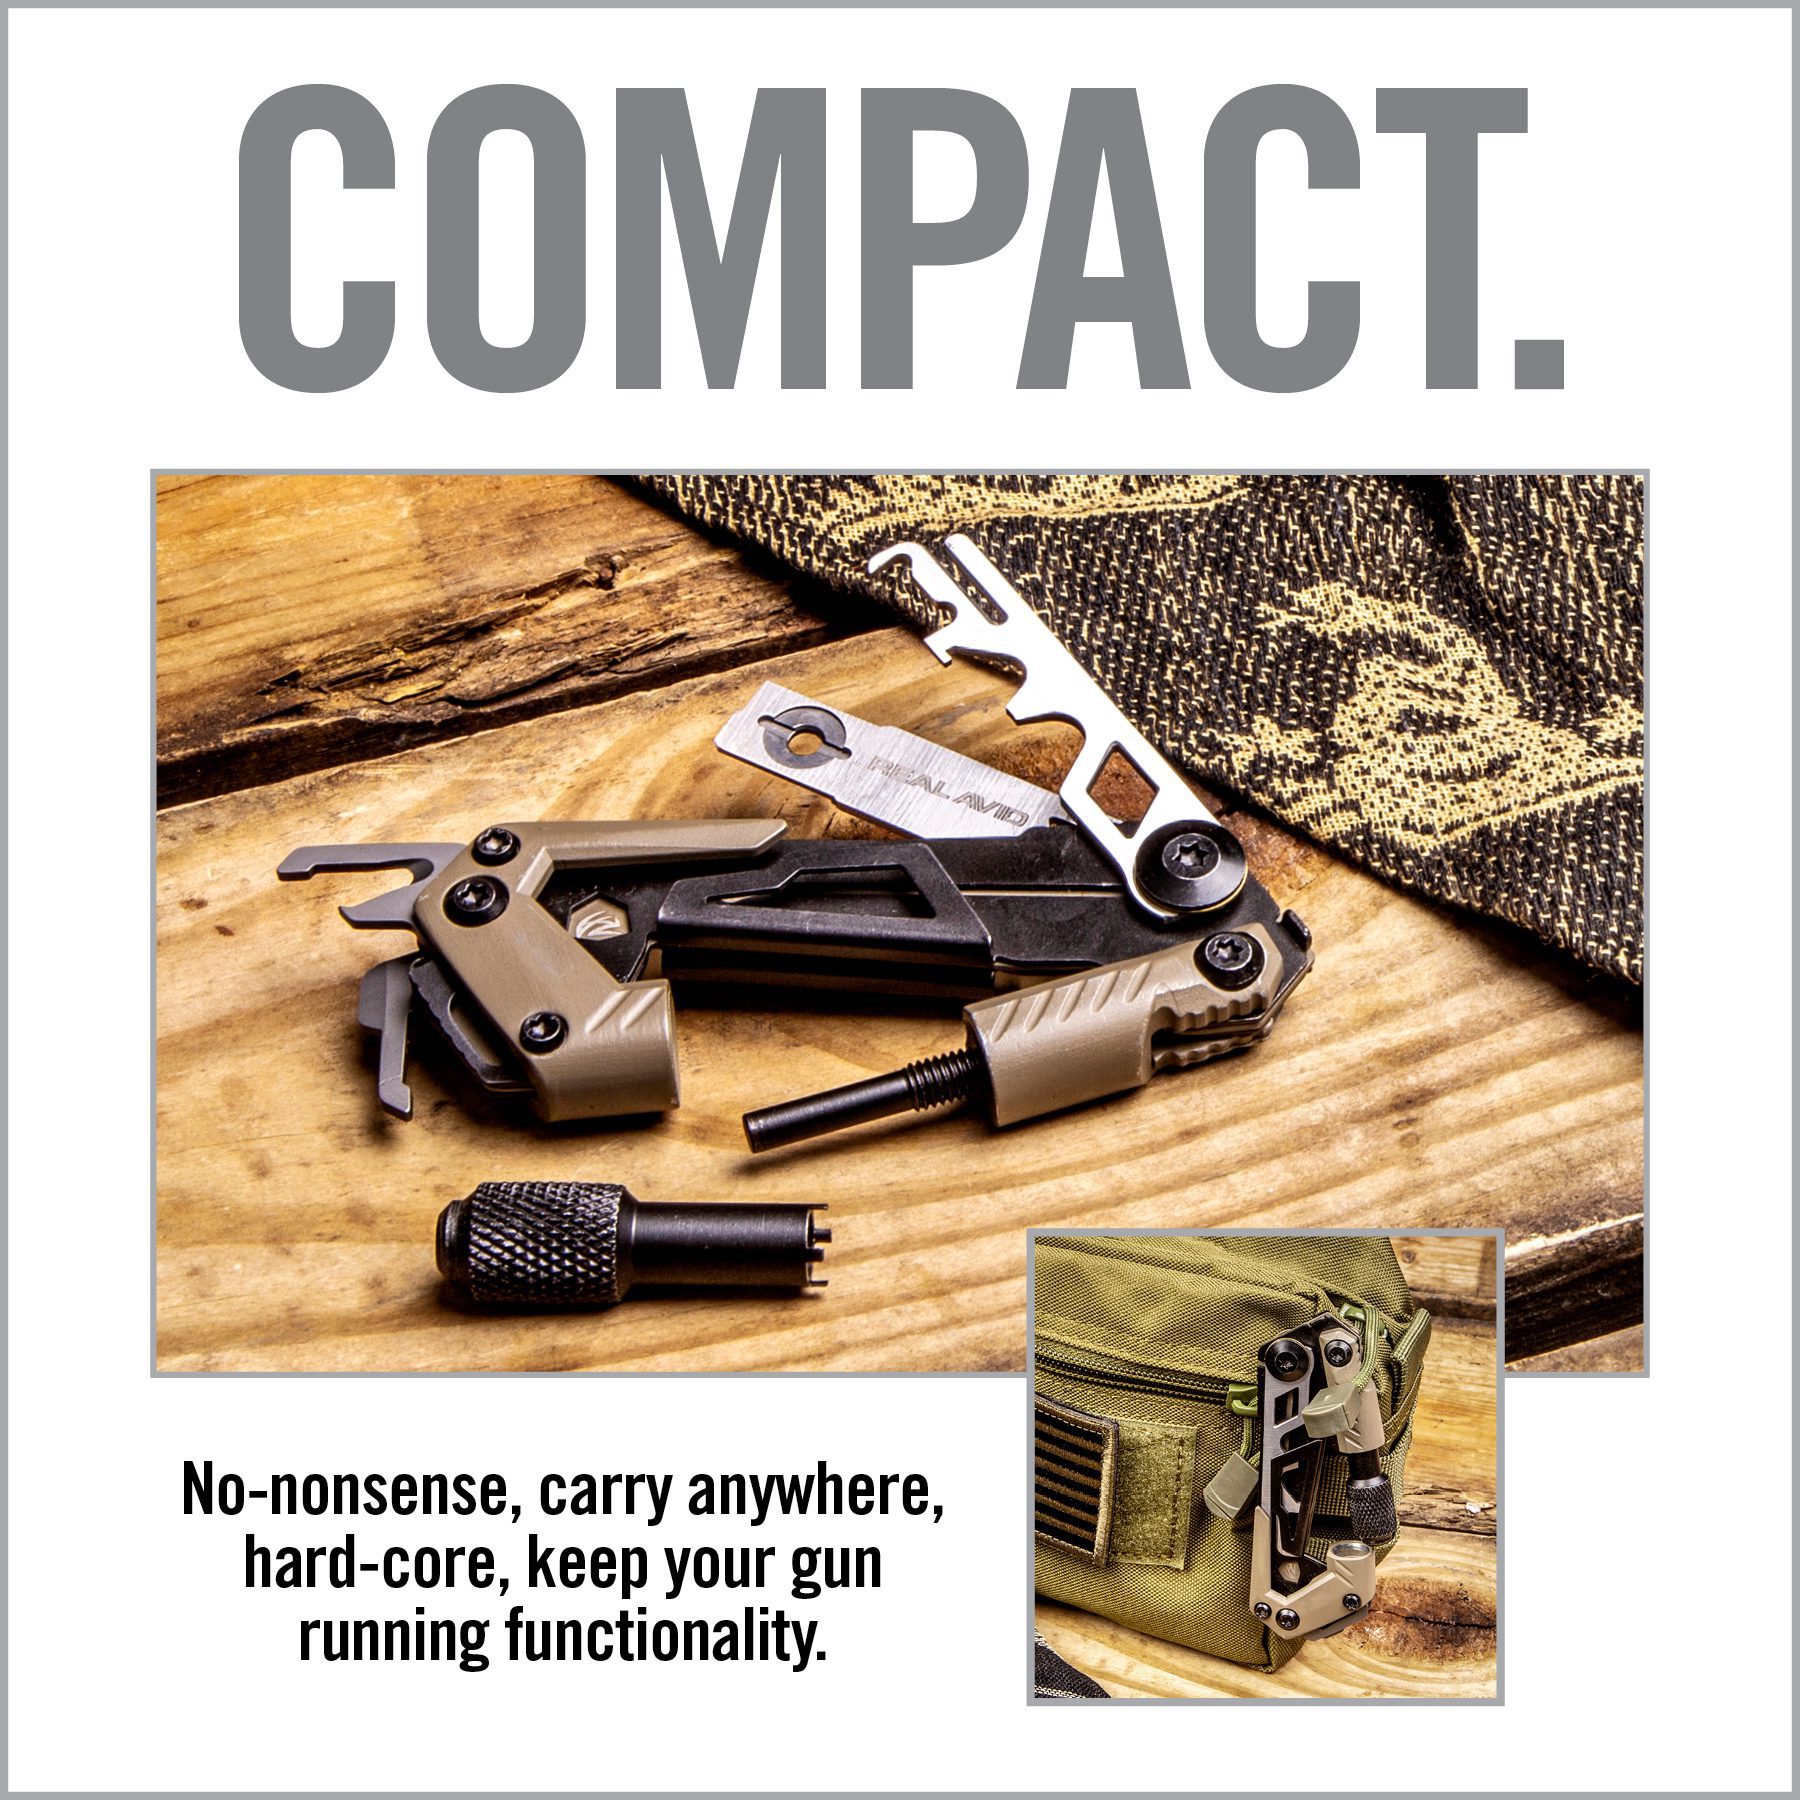 a magazine cover with an image of some tools